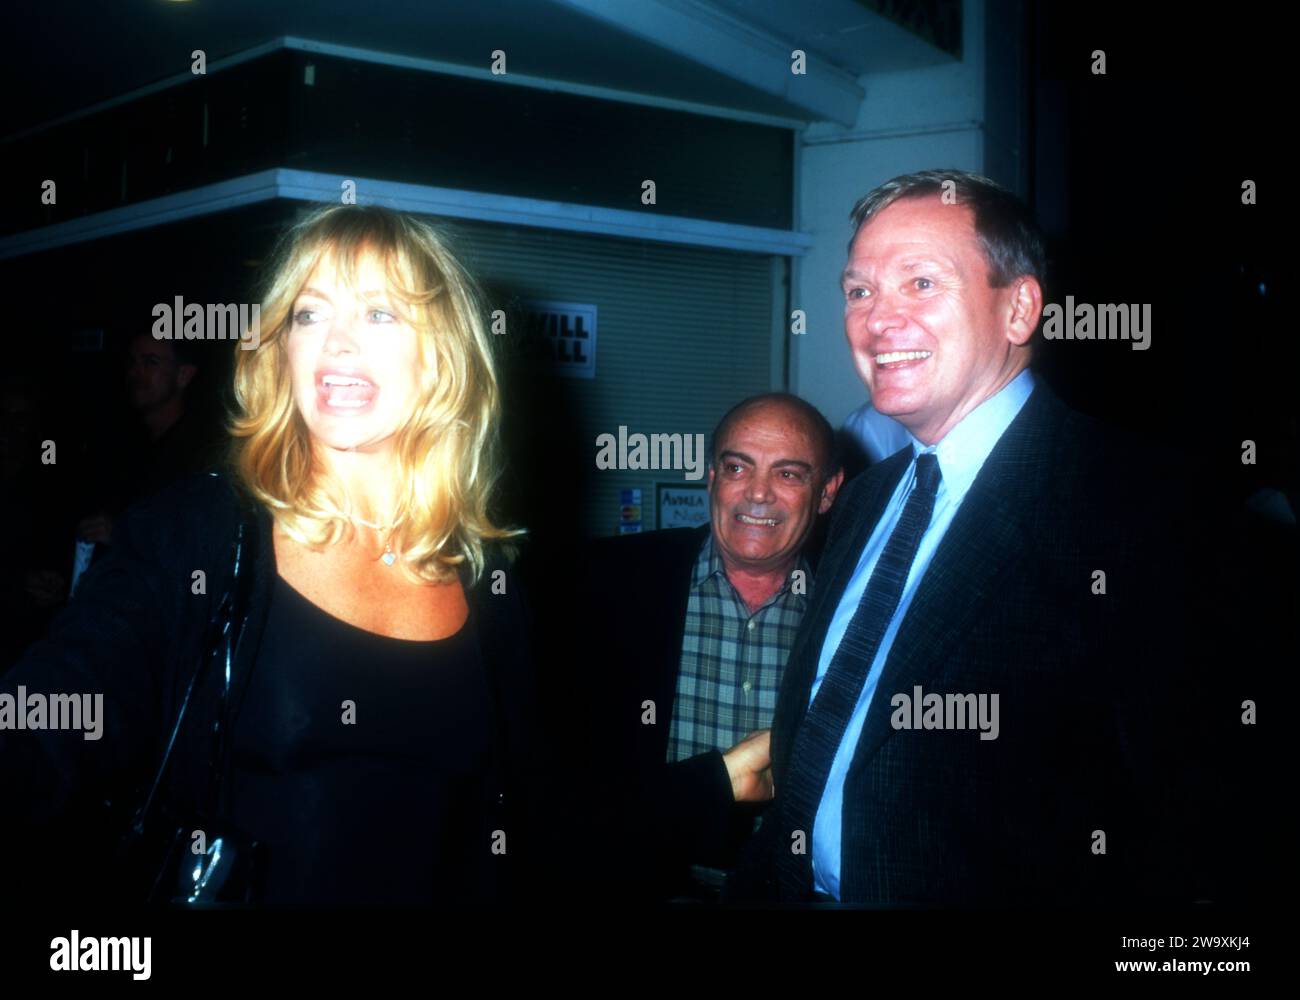 Los Angeles, California, USA 13th October 1996 (Exclusive) Actress Goldie Hawn and Costume Designer Bob Mackie on October 13, 1996 in Los Angeles, California, USA. Photo by Barry King/Alamy Stock Photo Stock Photo